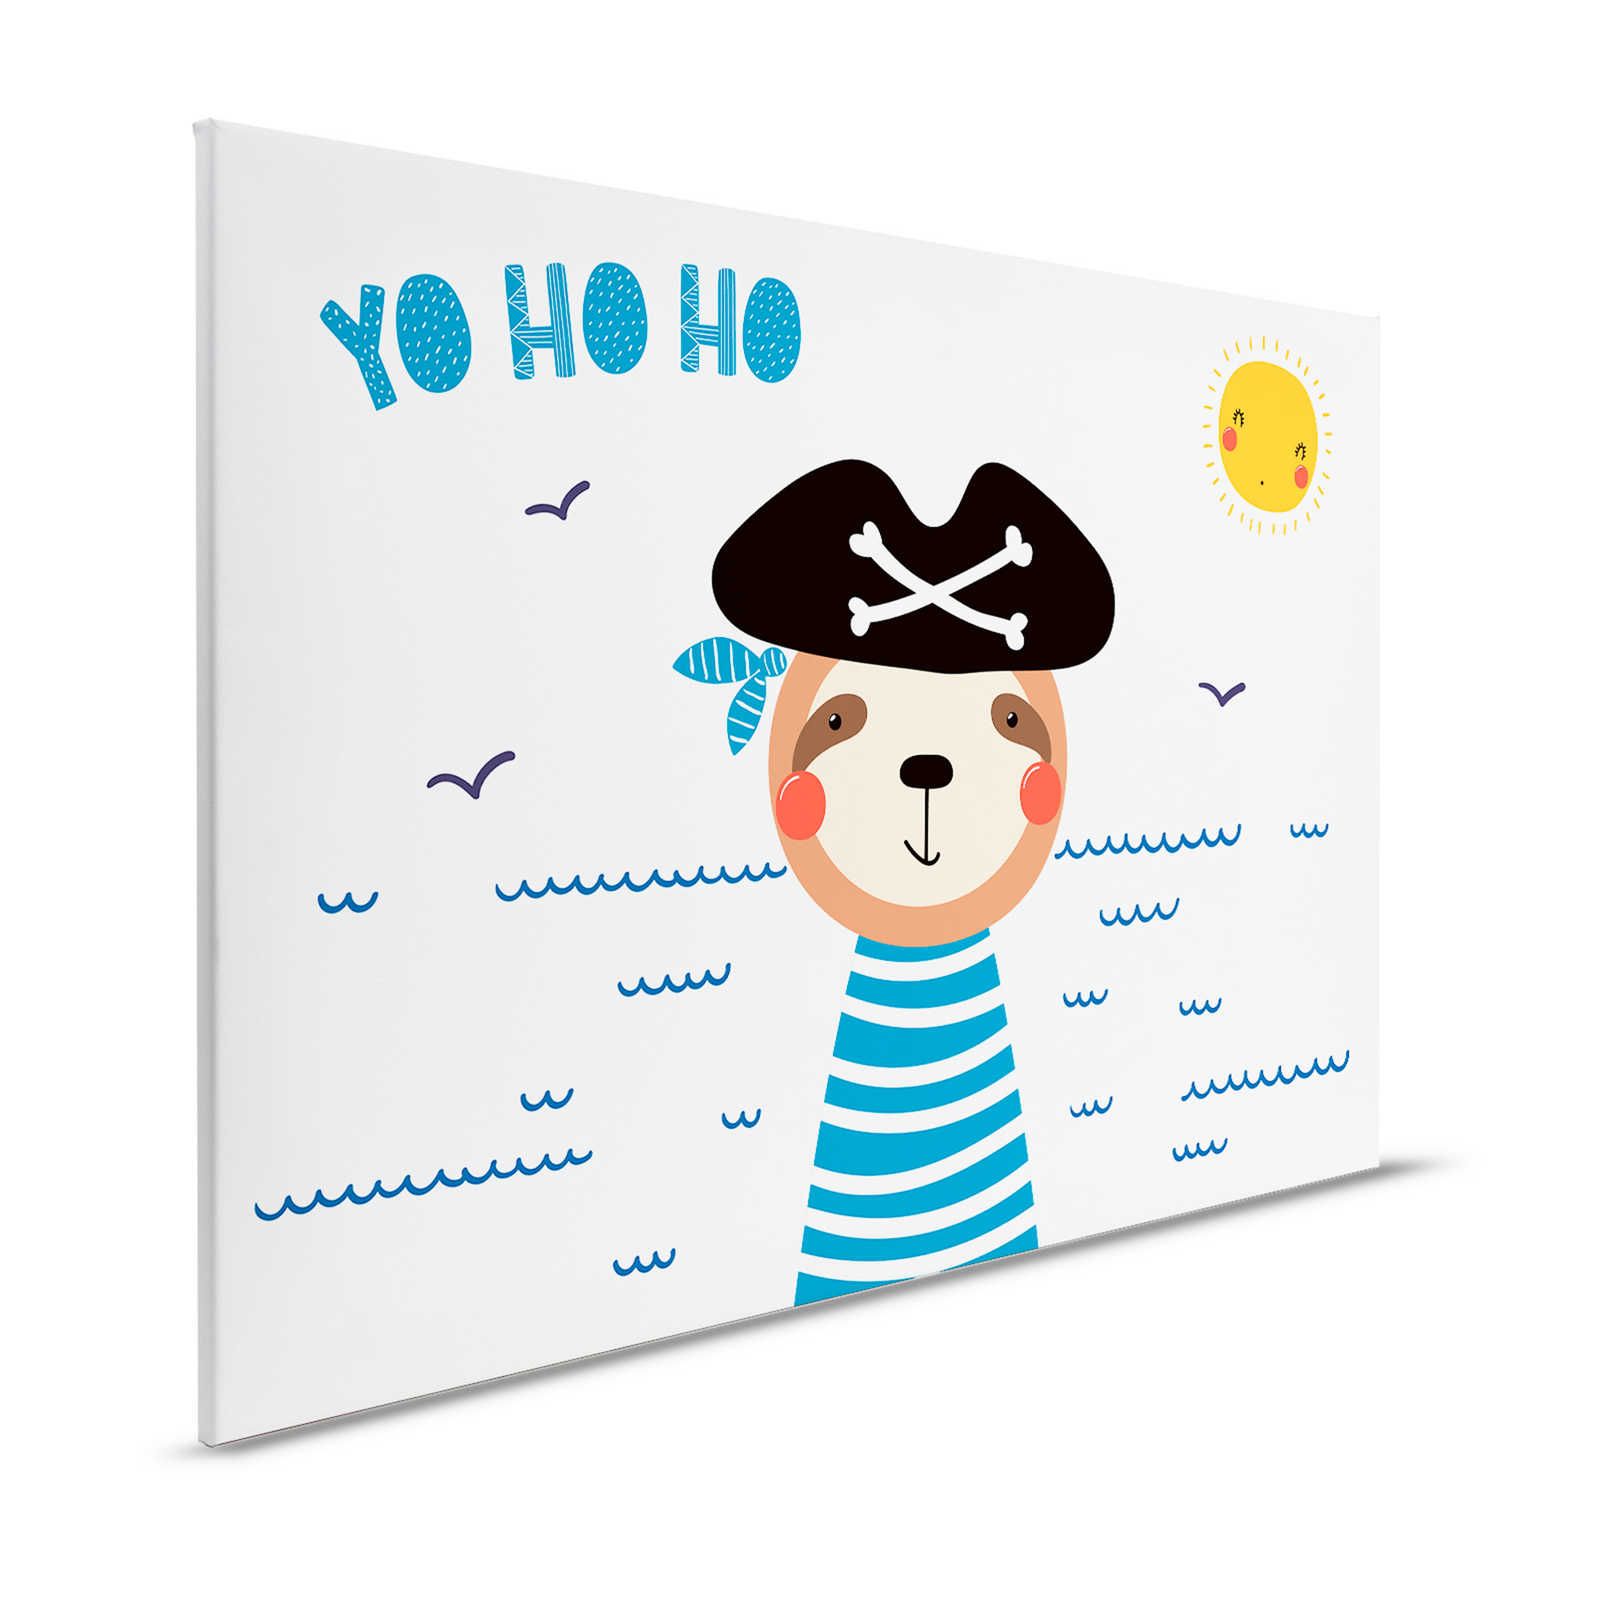 Canvas for children's room with bear pirate - 120 cm x 80 cm
